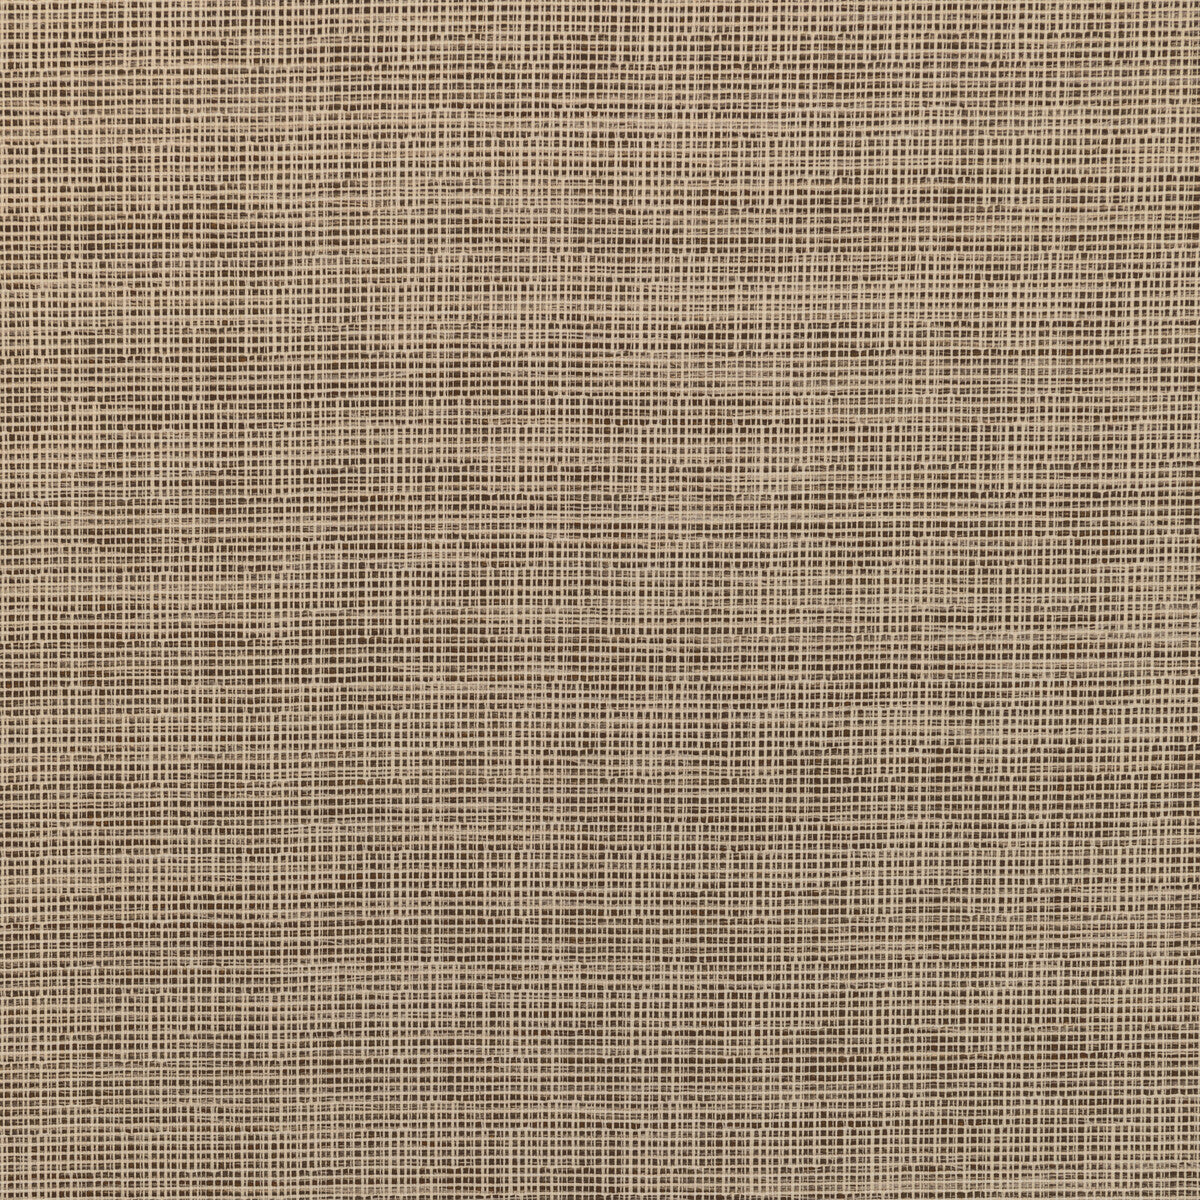 Kravet Smart fabric in 36303-6 color - pattern 36303.6.0 - by Kravet Smart in the Performance Crypton Home collection